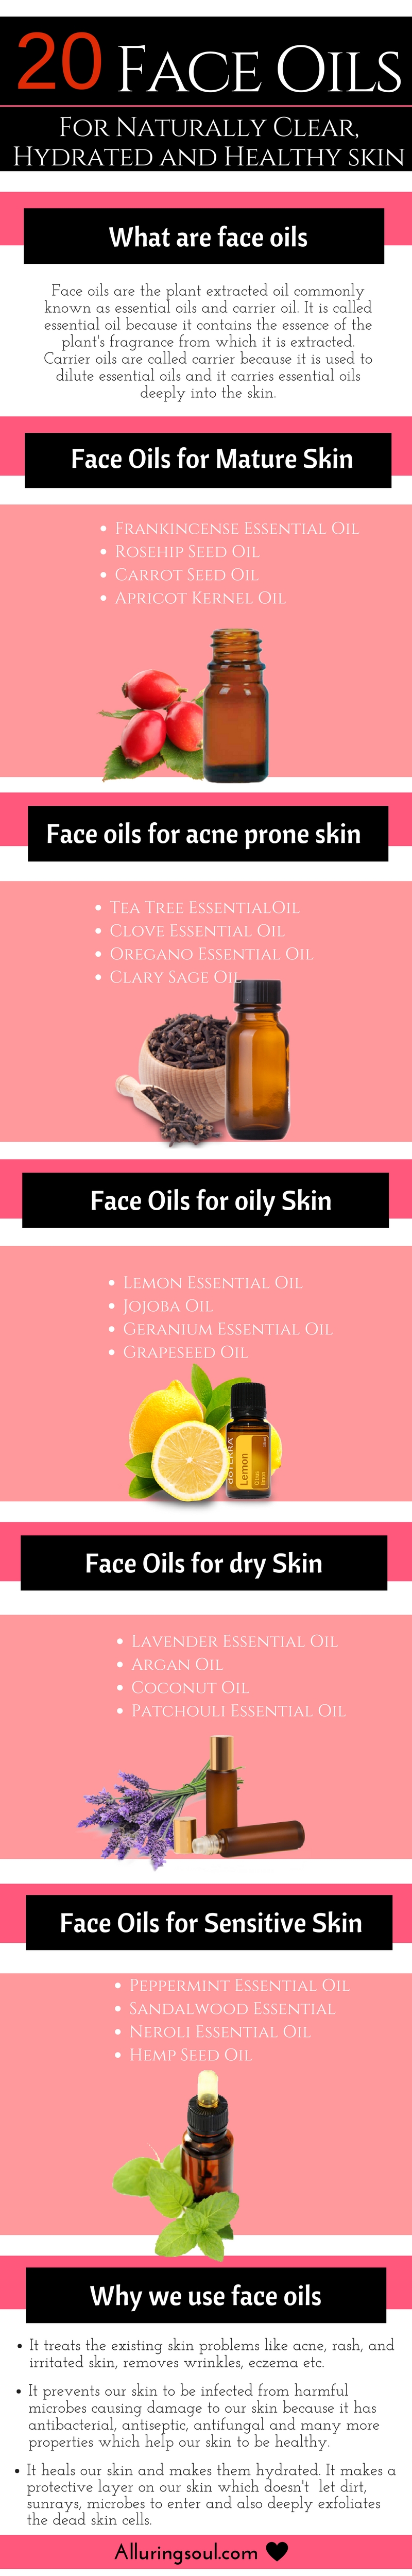 20 Face Oils For Every Skin Type: Which One Is Right For You? Infographic